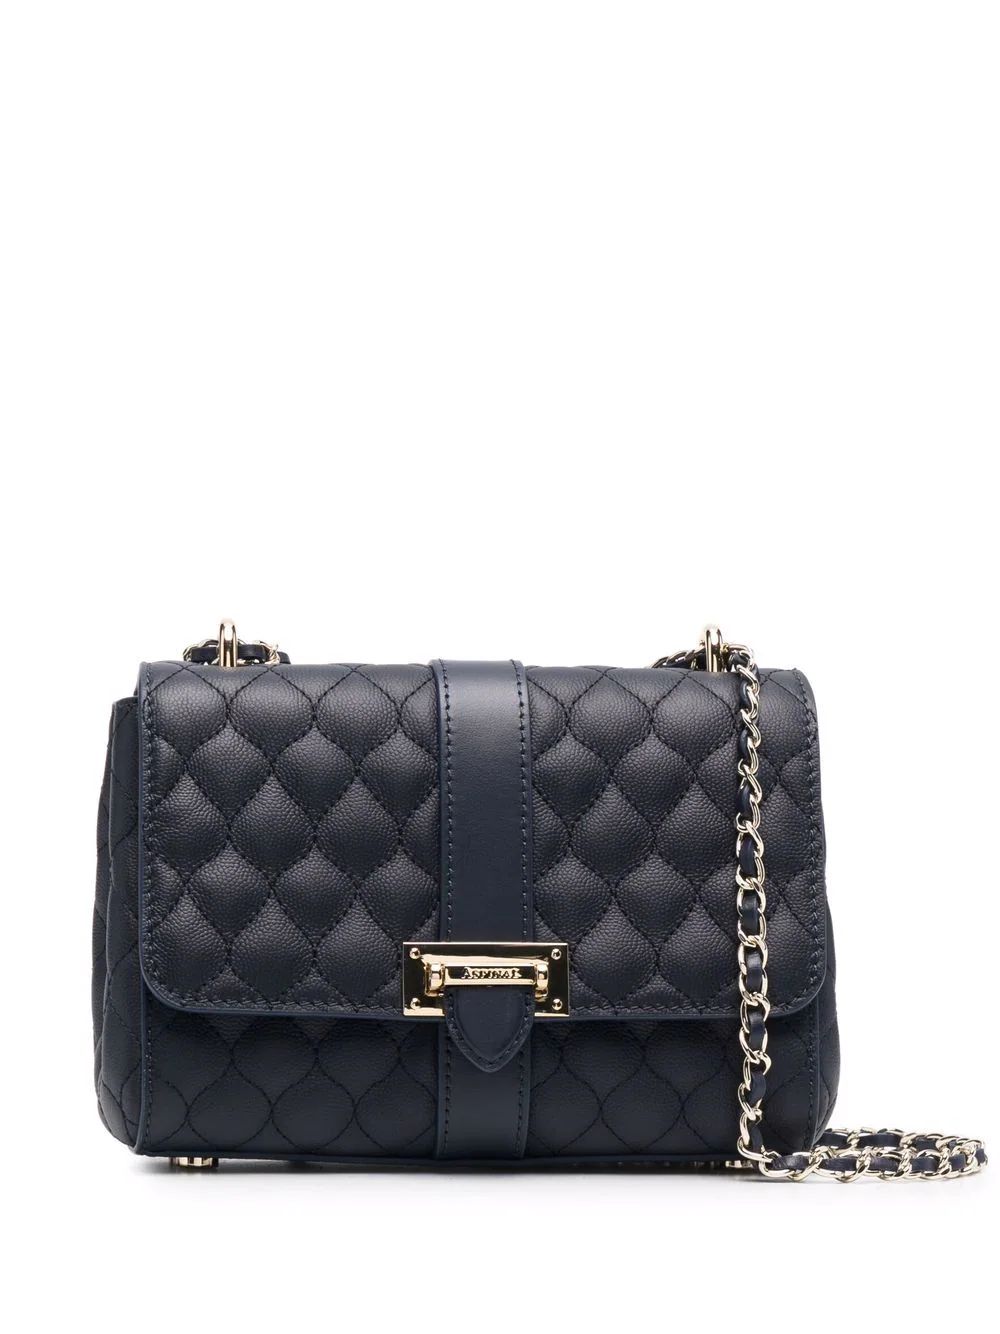 Aspinal Of London Lottie Quilted Leather Bag - Farfetch | Farfetch Global